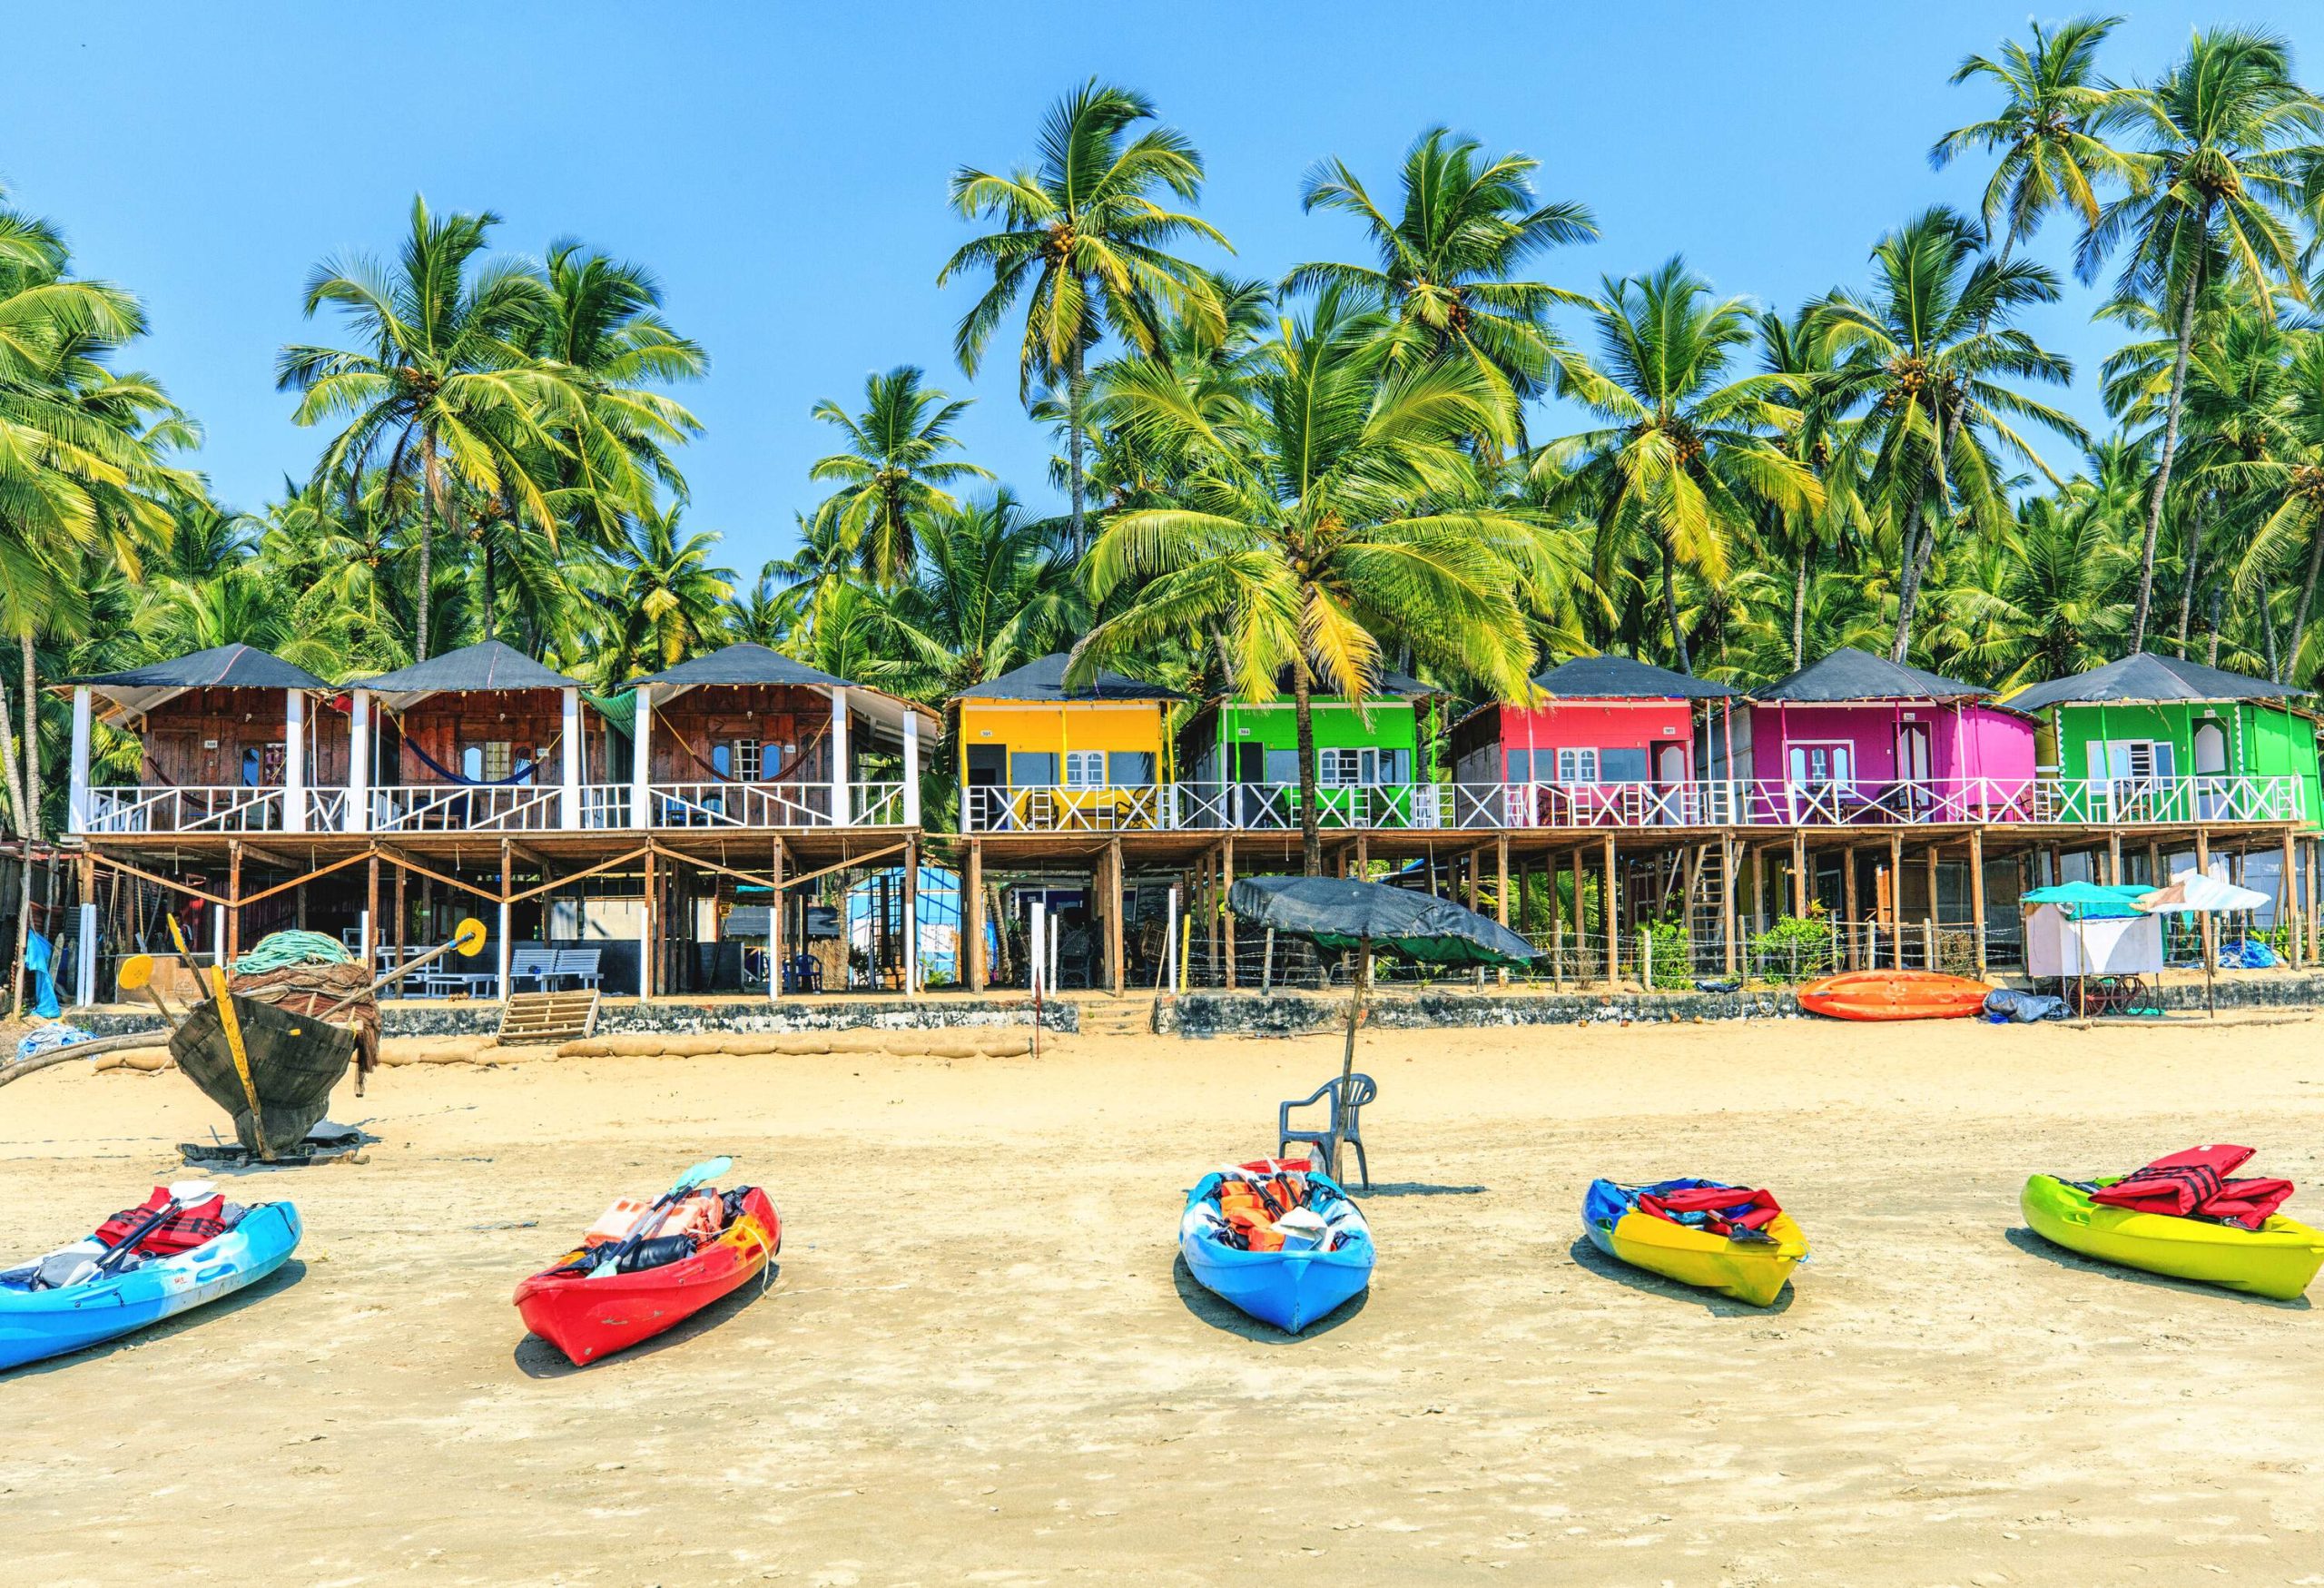 A row of multi-coloured elevated bungalows surrounded by lush palm trees facing the beach with tiny boats.